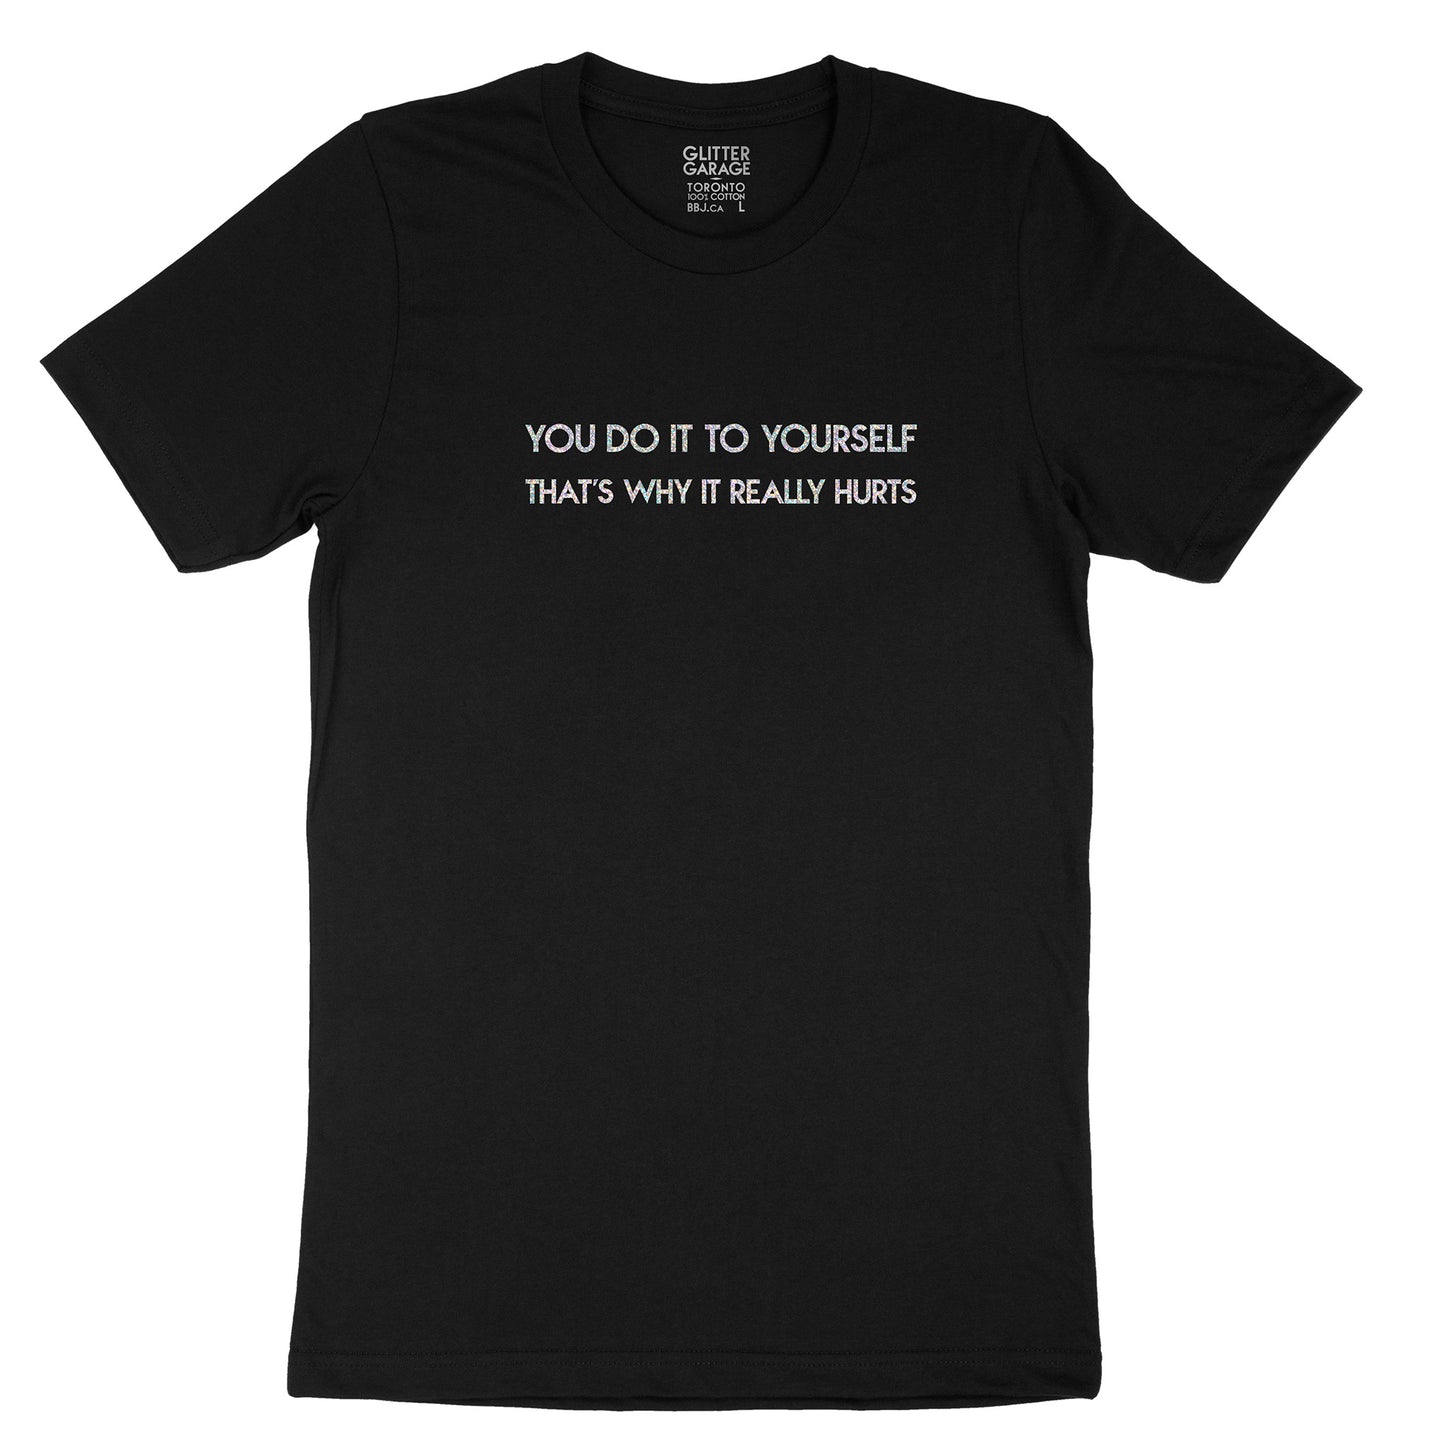 Custom text tee - You Do It To Yourself -holographic - USE YOUR WORDS black unisex t-shirt by BBJ / Glitter Garage